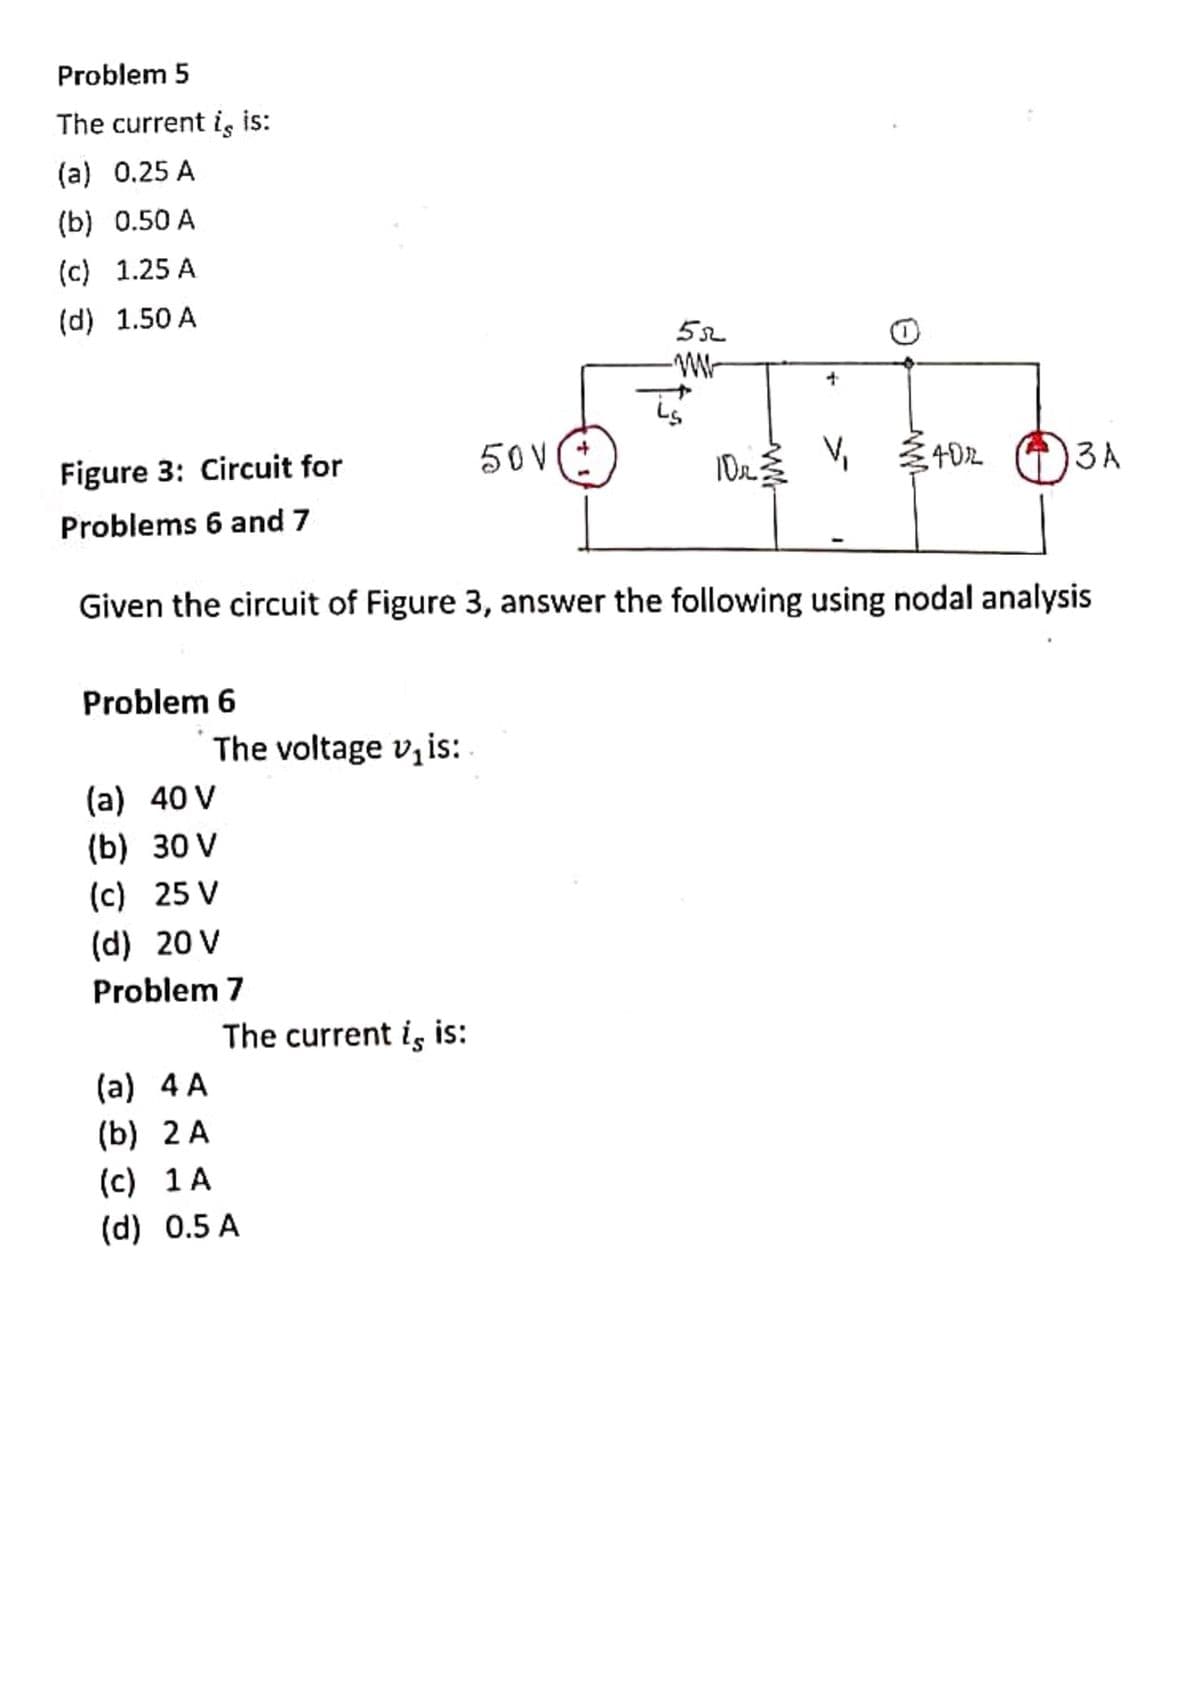 Problem 5
The current is is:
(a) 0.25 A
(b) 0.50 A
(c) 1.25 A
(d) 1.50 A
Figure 3: Circuit for
50V:
4D2
3A
Problems 6 and 7
Given the circuit of Figure 3, answer the following using nodal analysis
Problem 6
The voltage v,is:
(a) 40 V
(b) 30 V
(c) 25 V
(d) 20 V
Problem 7
The current is is:
(a) 4 A
(b) 2 A
(c) 1 A
(d) 0.5 A
